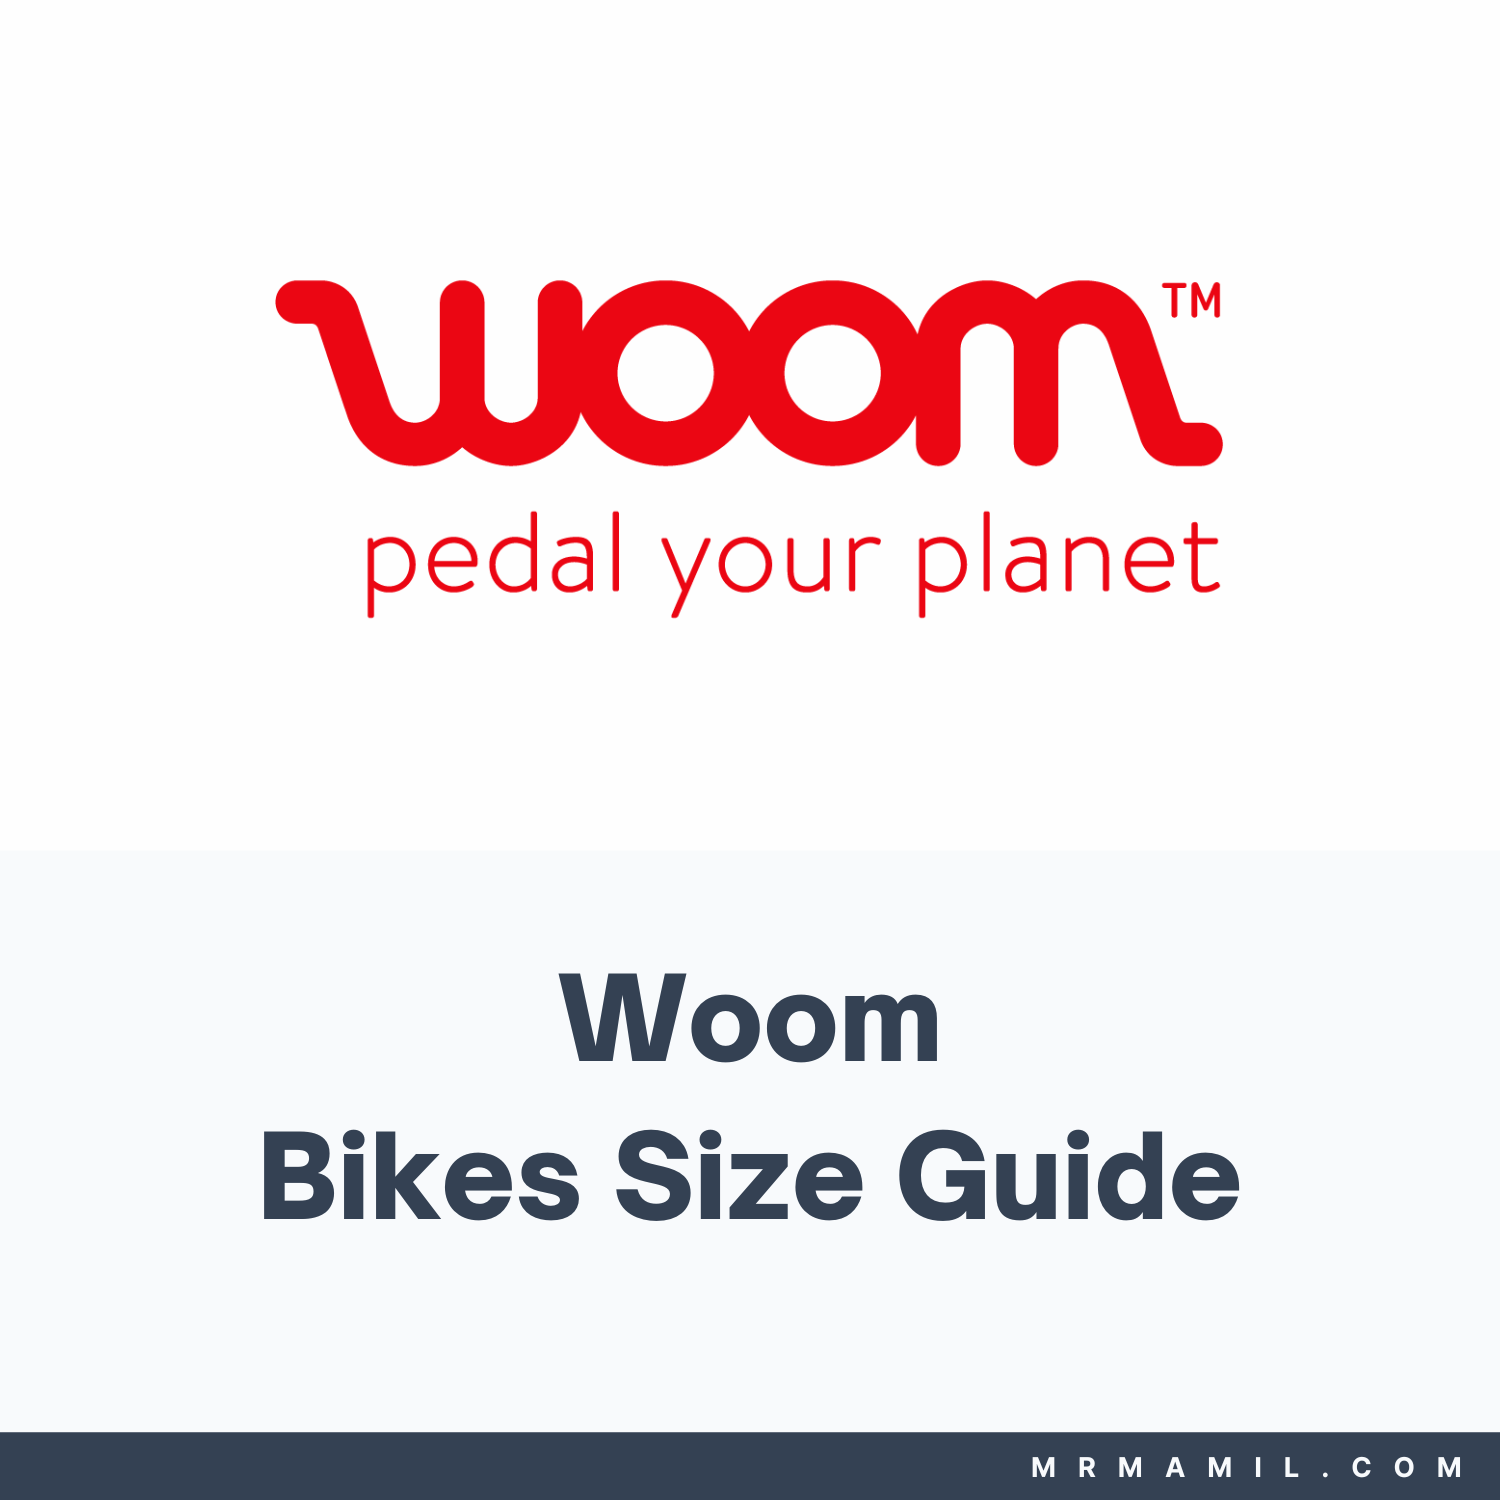 Woom Bikes Size Guide